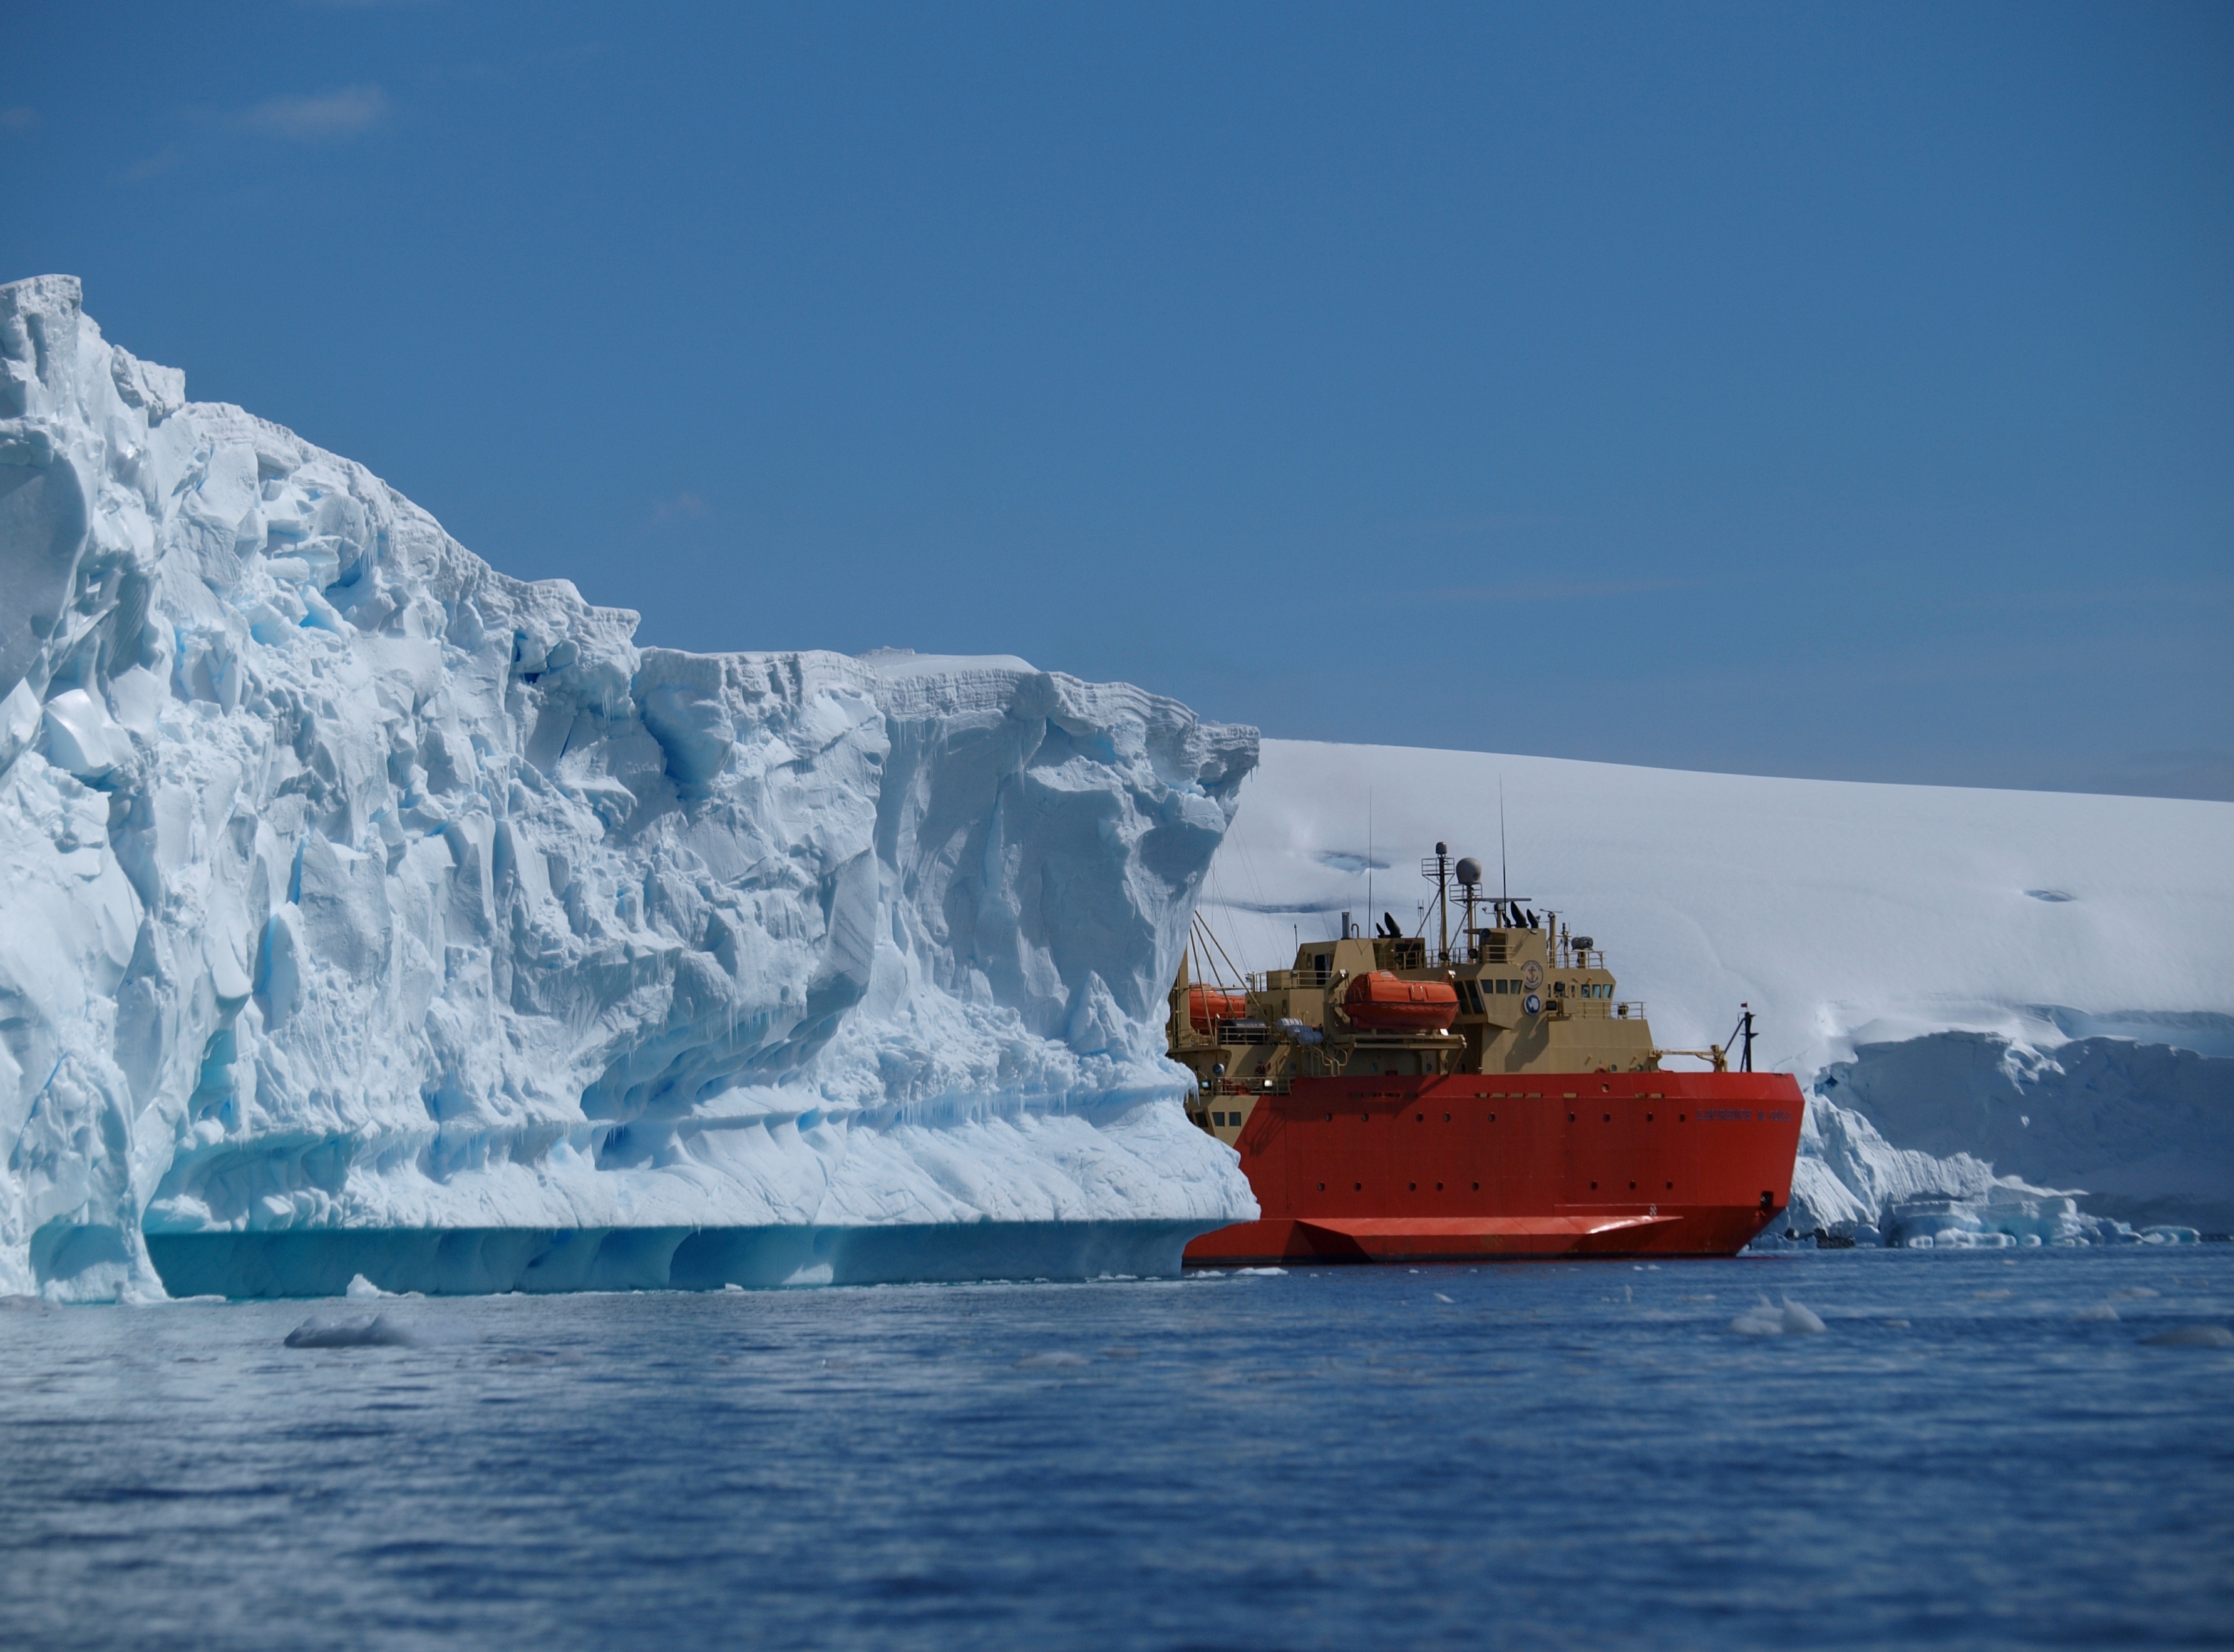 A ship navigates between two icebergs.